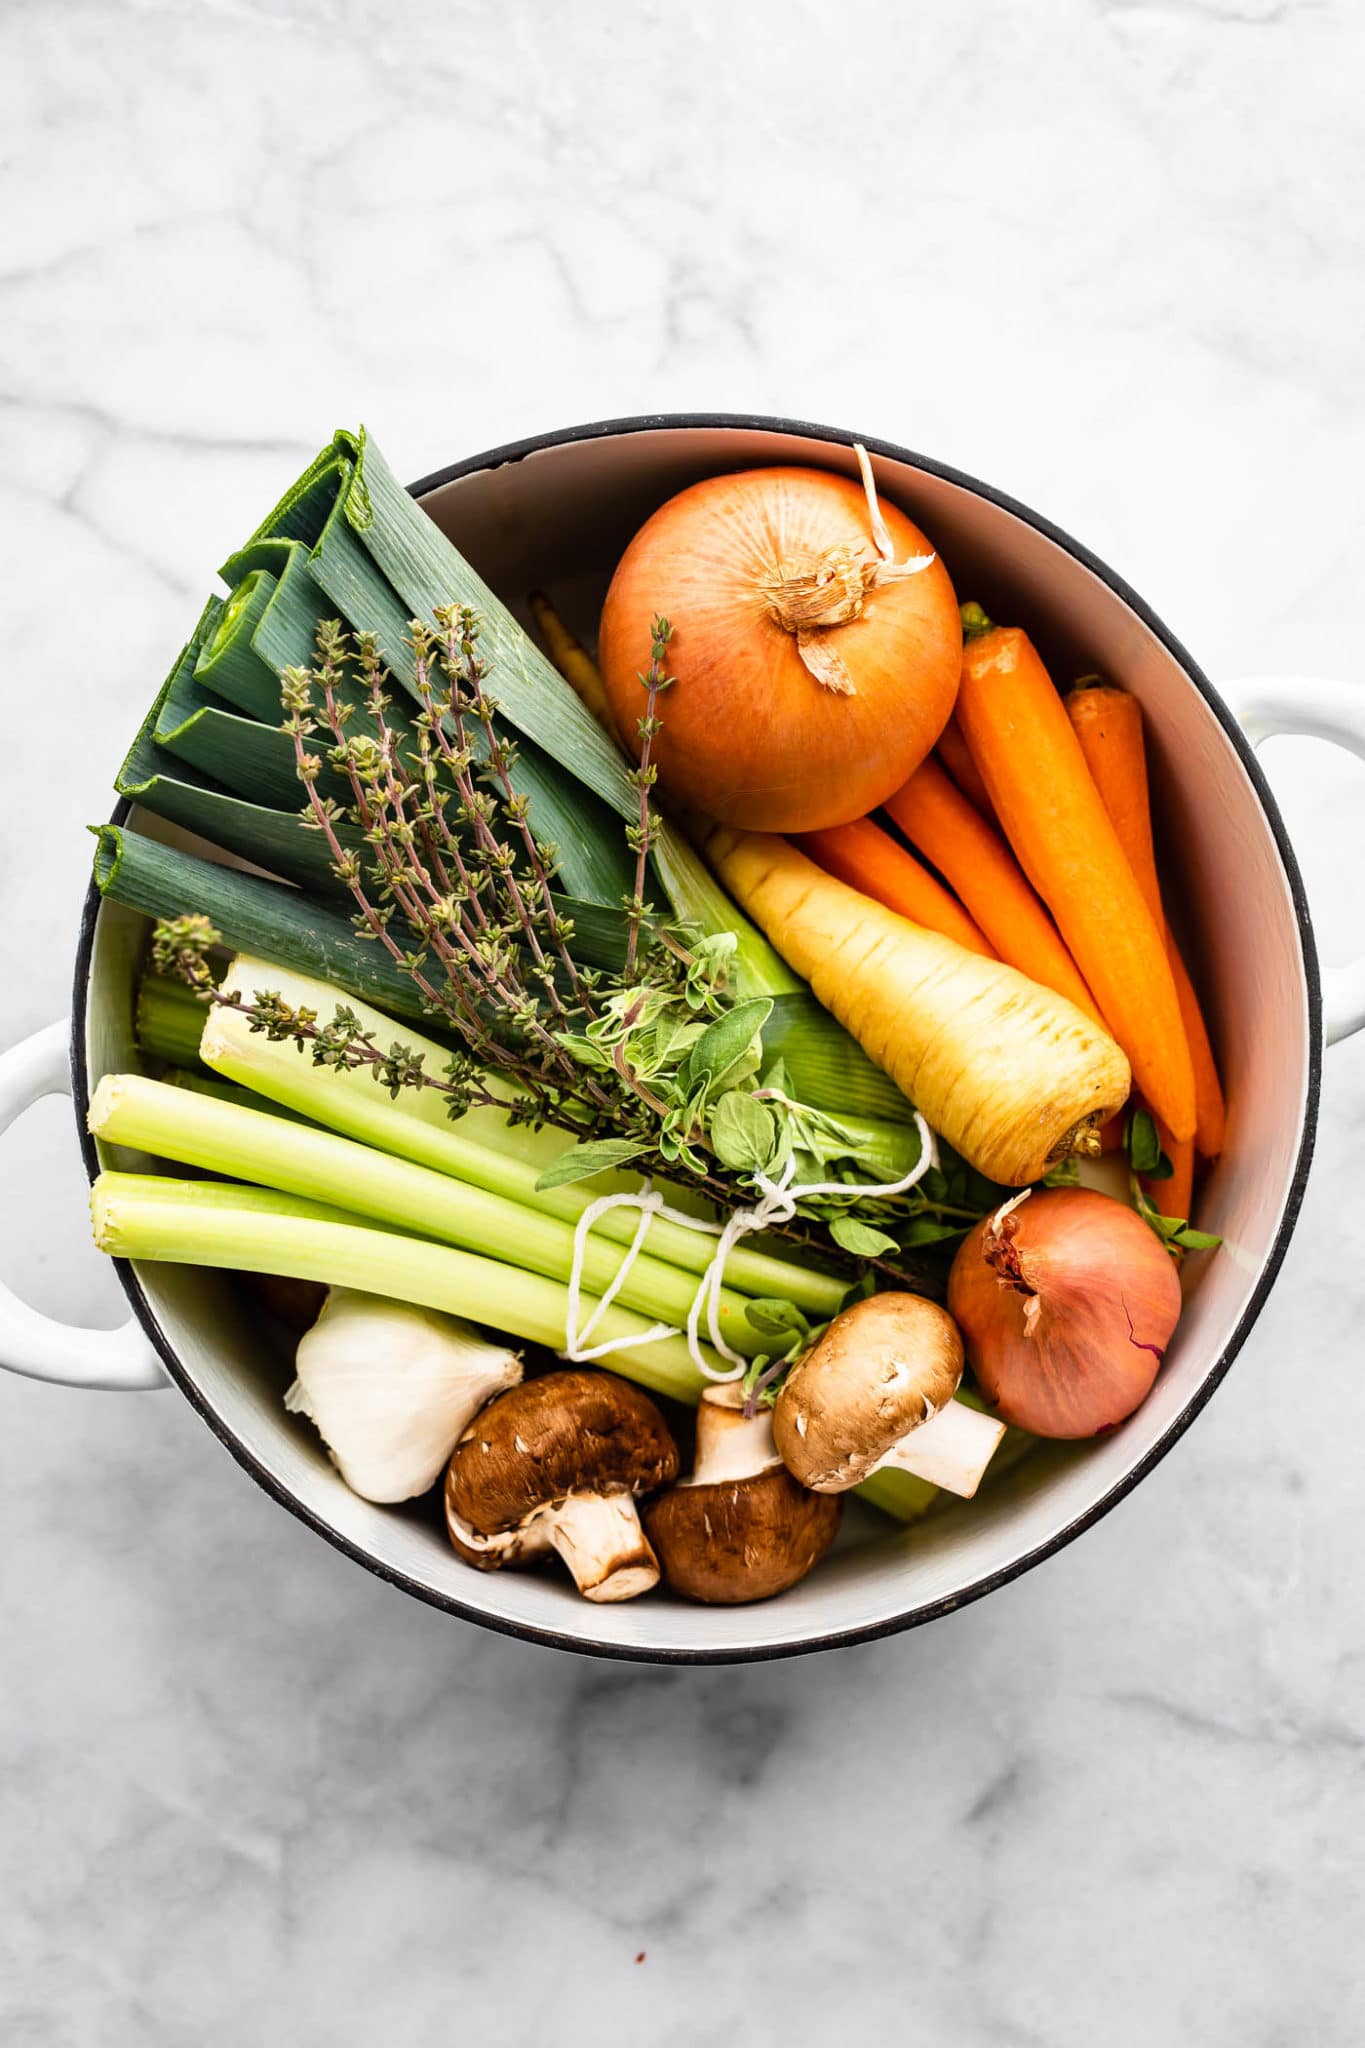 a pan full of vegetables including an onion, shallot, carrots, a parsnip, celery, leaks, mushrooms, and fresh herbs showing how to make vegetable broth.